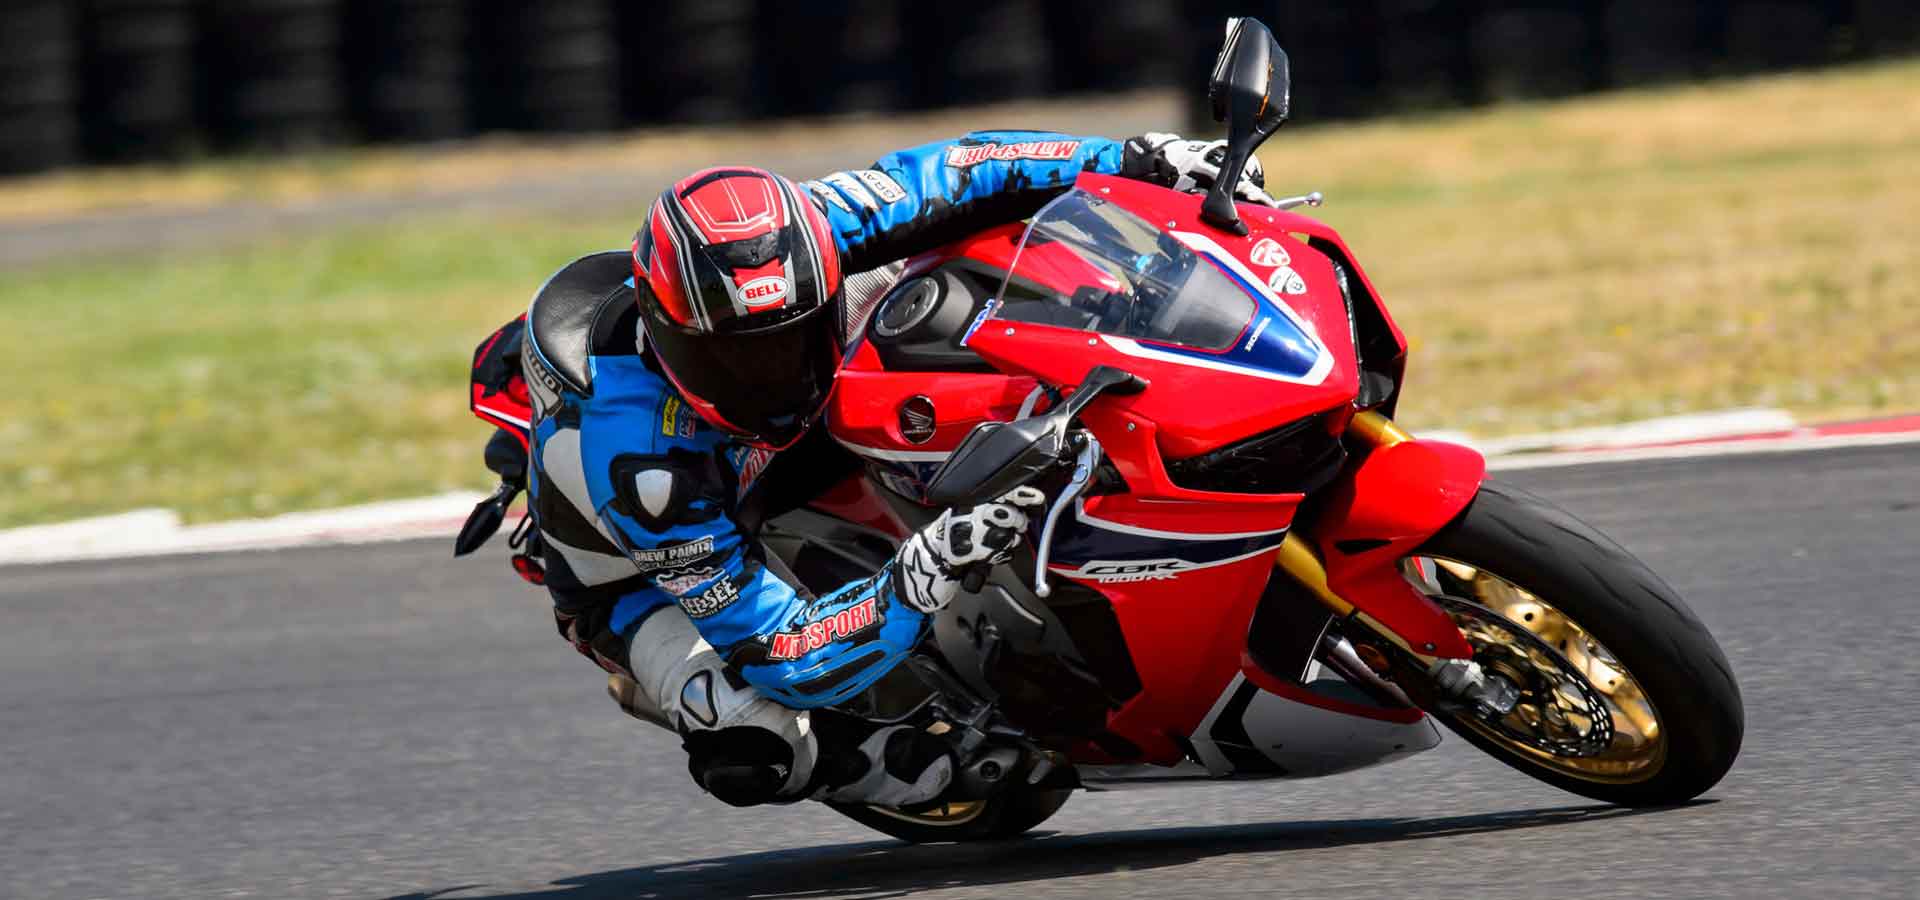 Andy riding a Honda CBR 1000 in a test for Asphalt and Rubber of all new liter motorcycles at Portland International Raceway